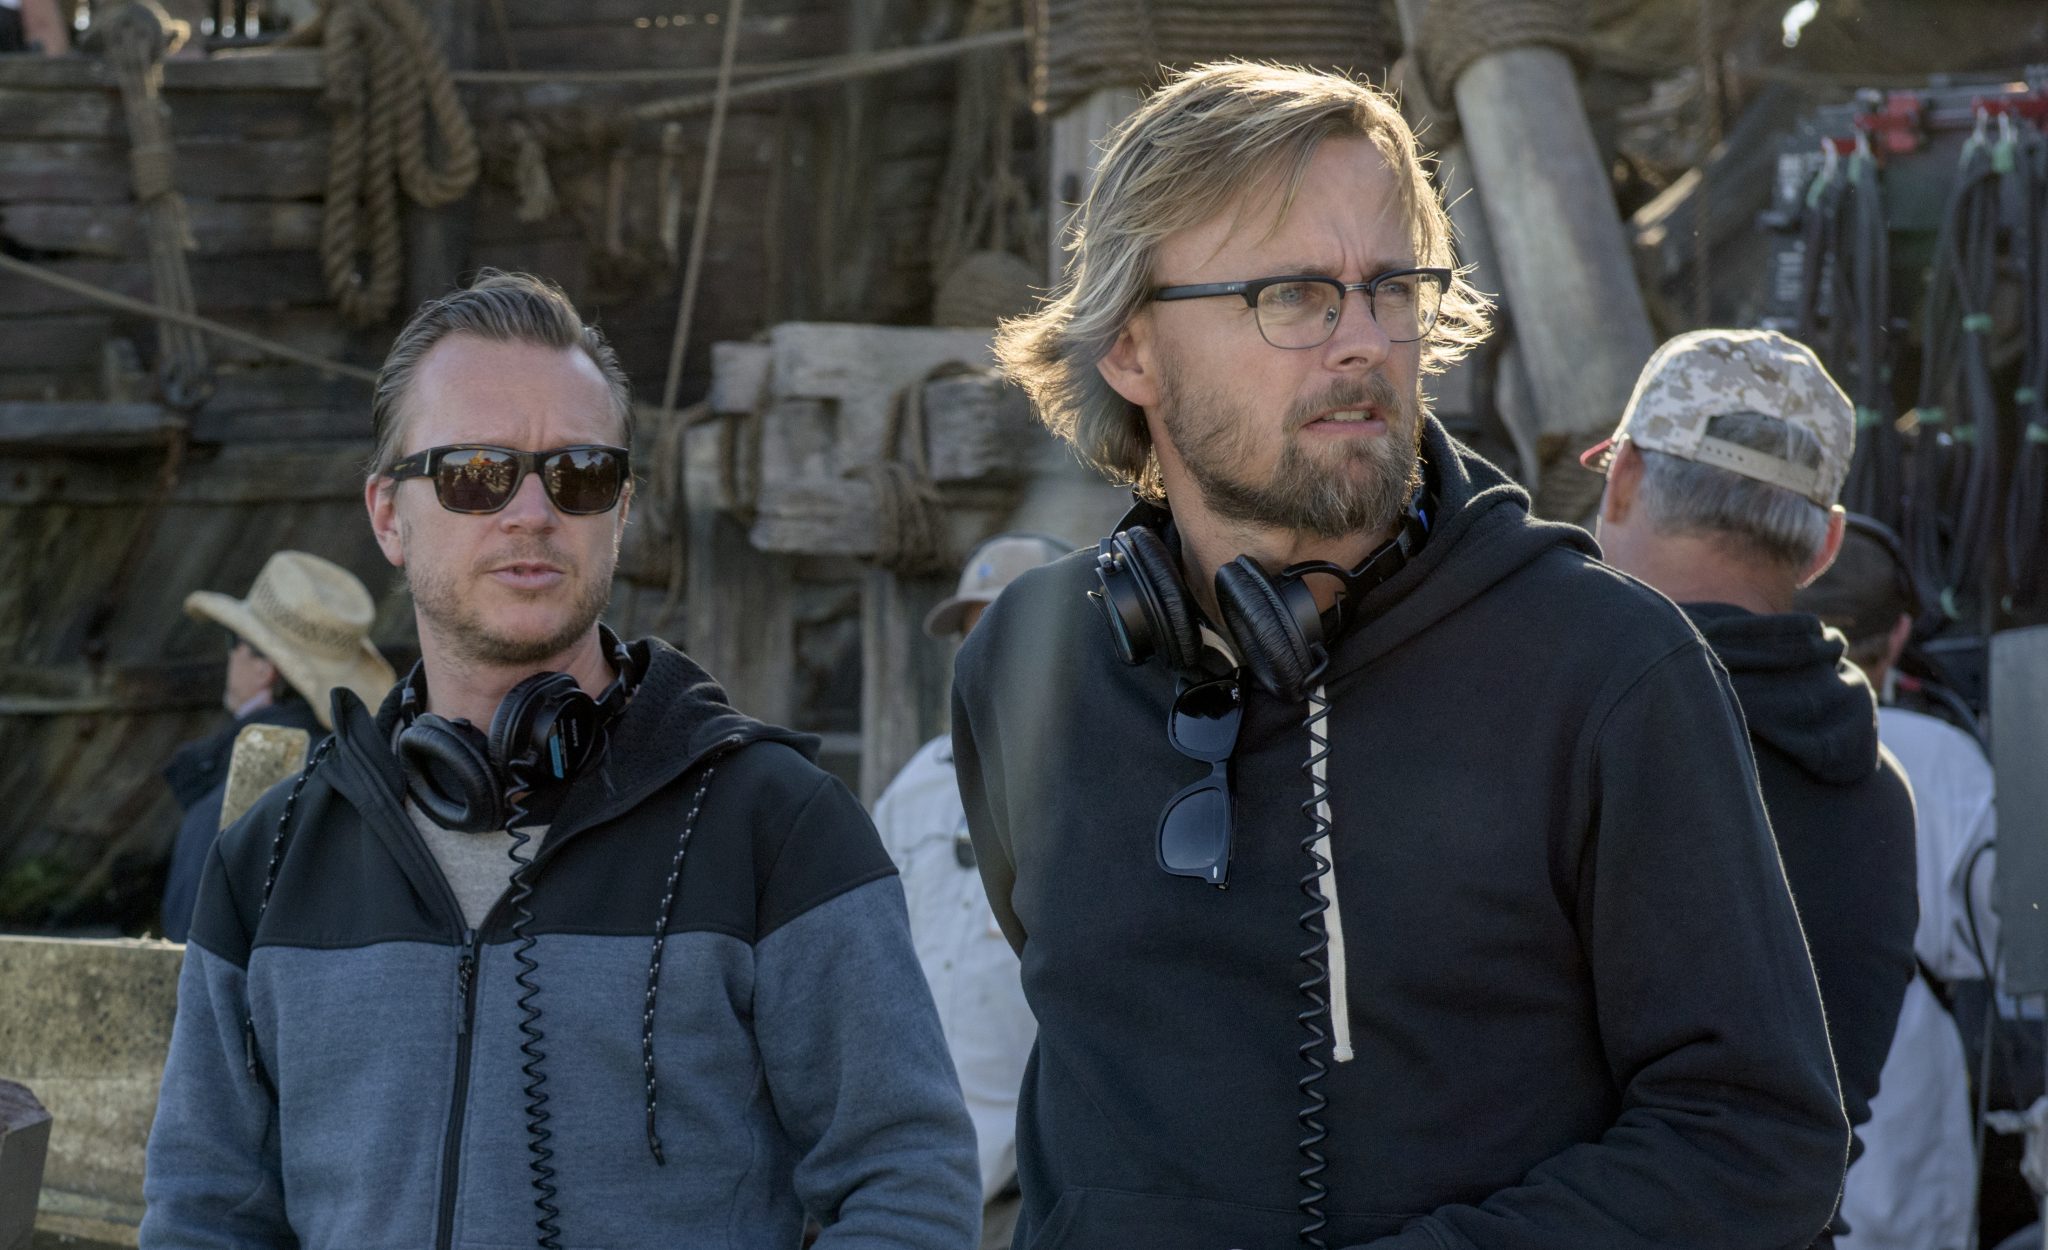 Five Fun Facts I Learned About Directors Espen Sandberg And Joachim Ronning